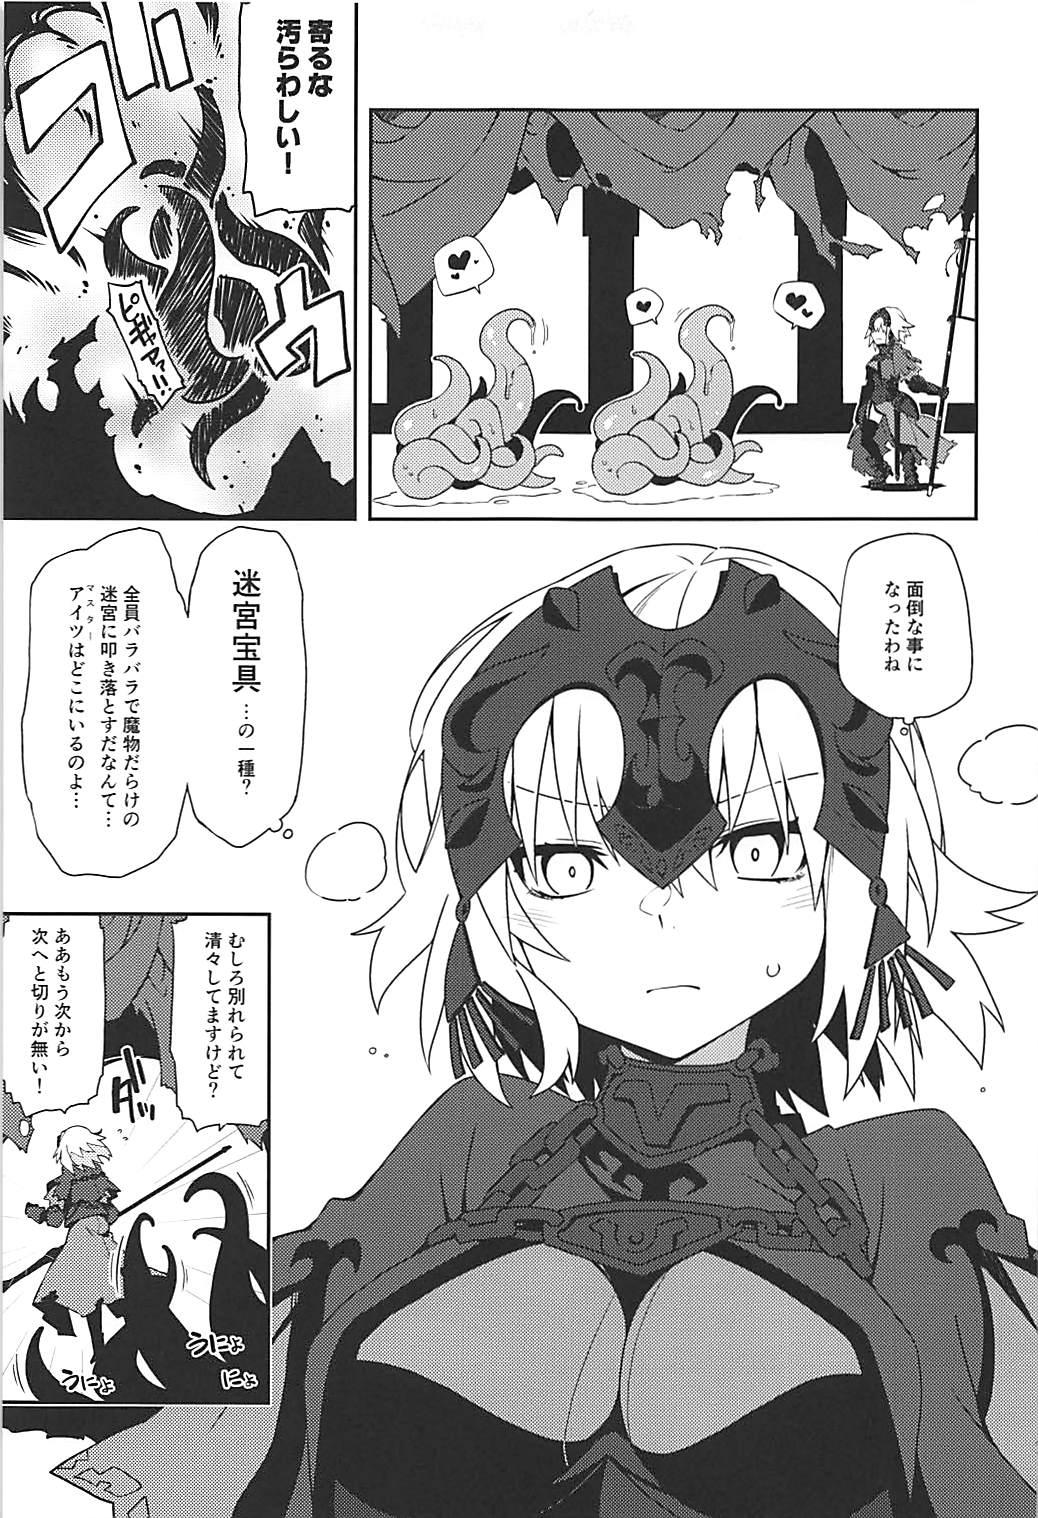 Spycam Hougu Ero Trap Dungeon - Fate grand order Doggy Style Porn - Page 4